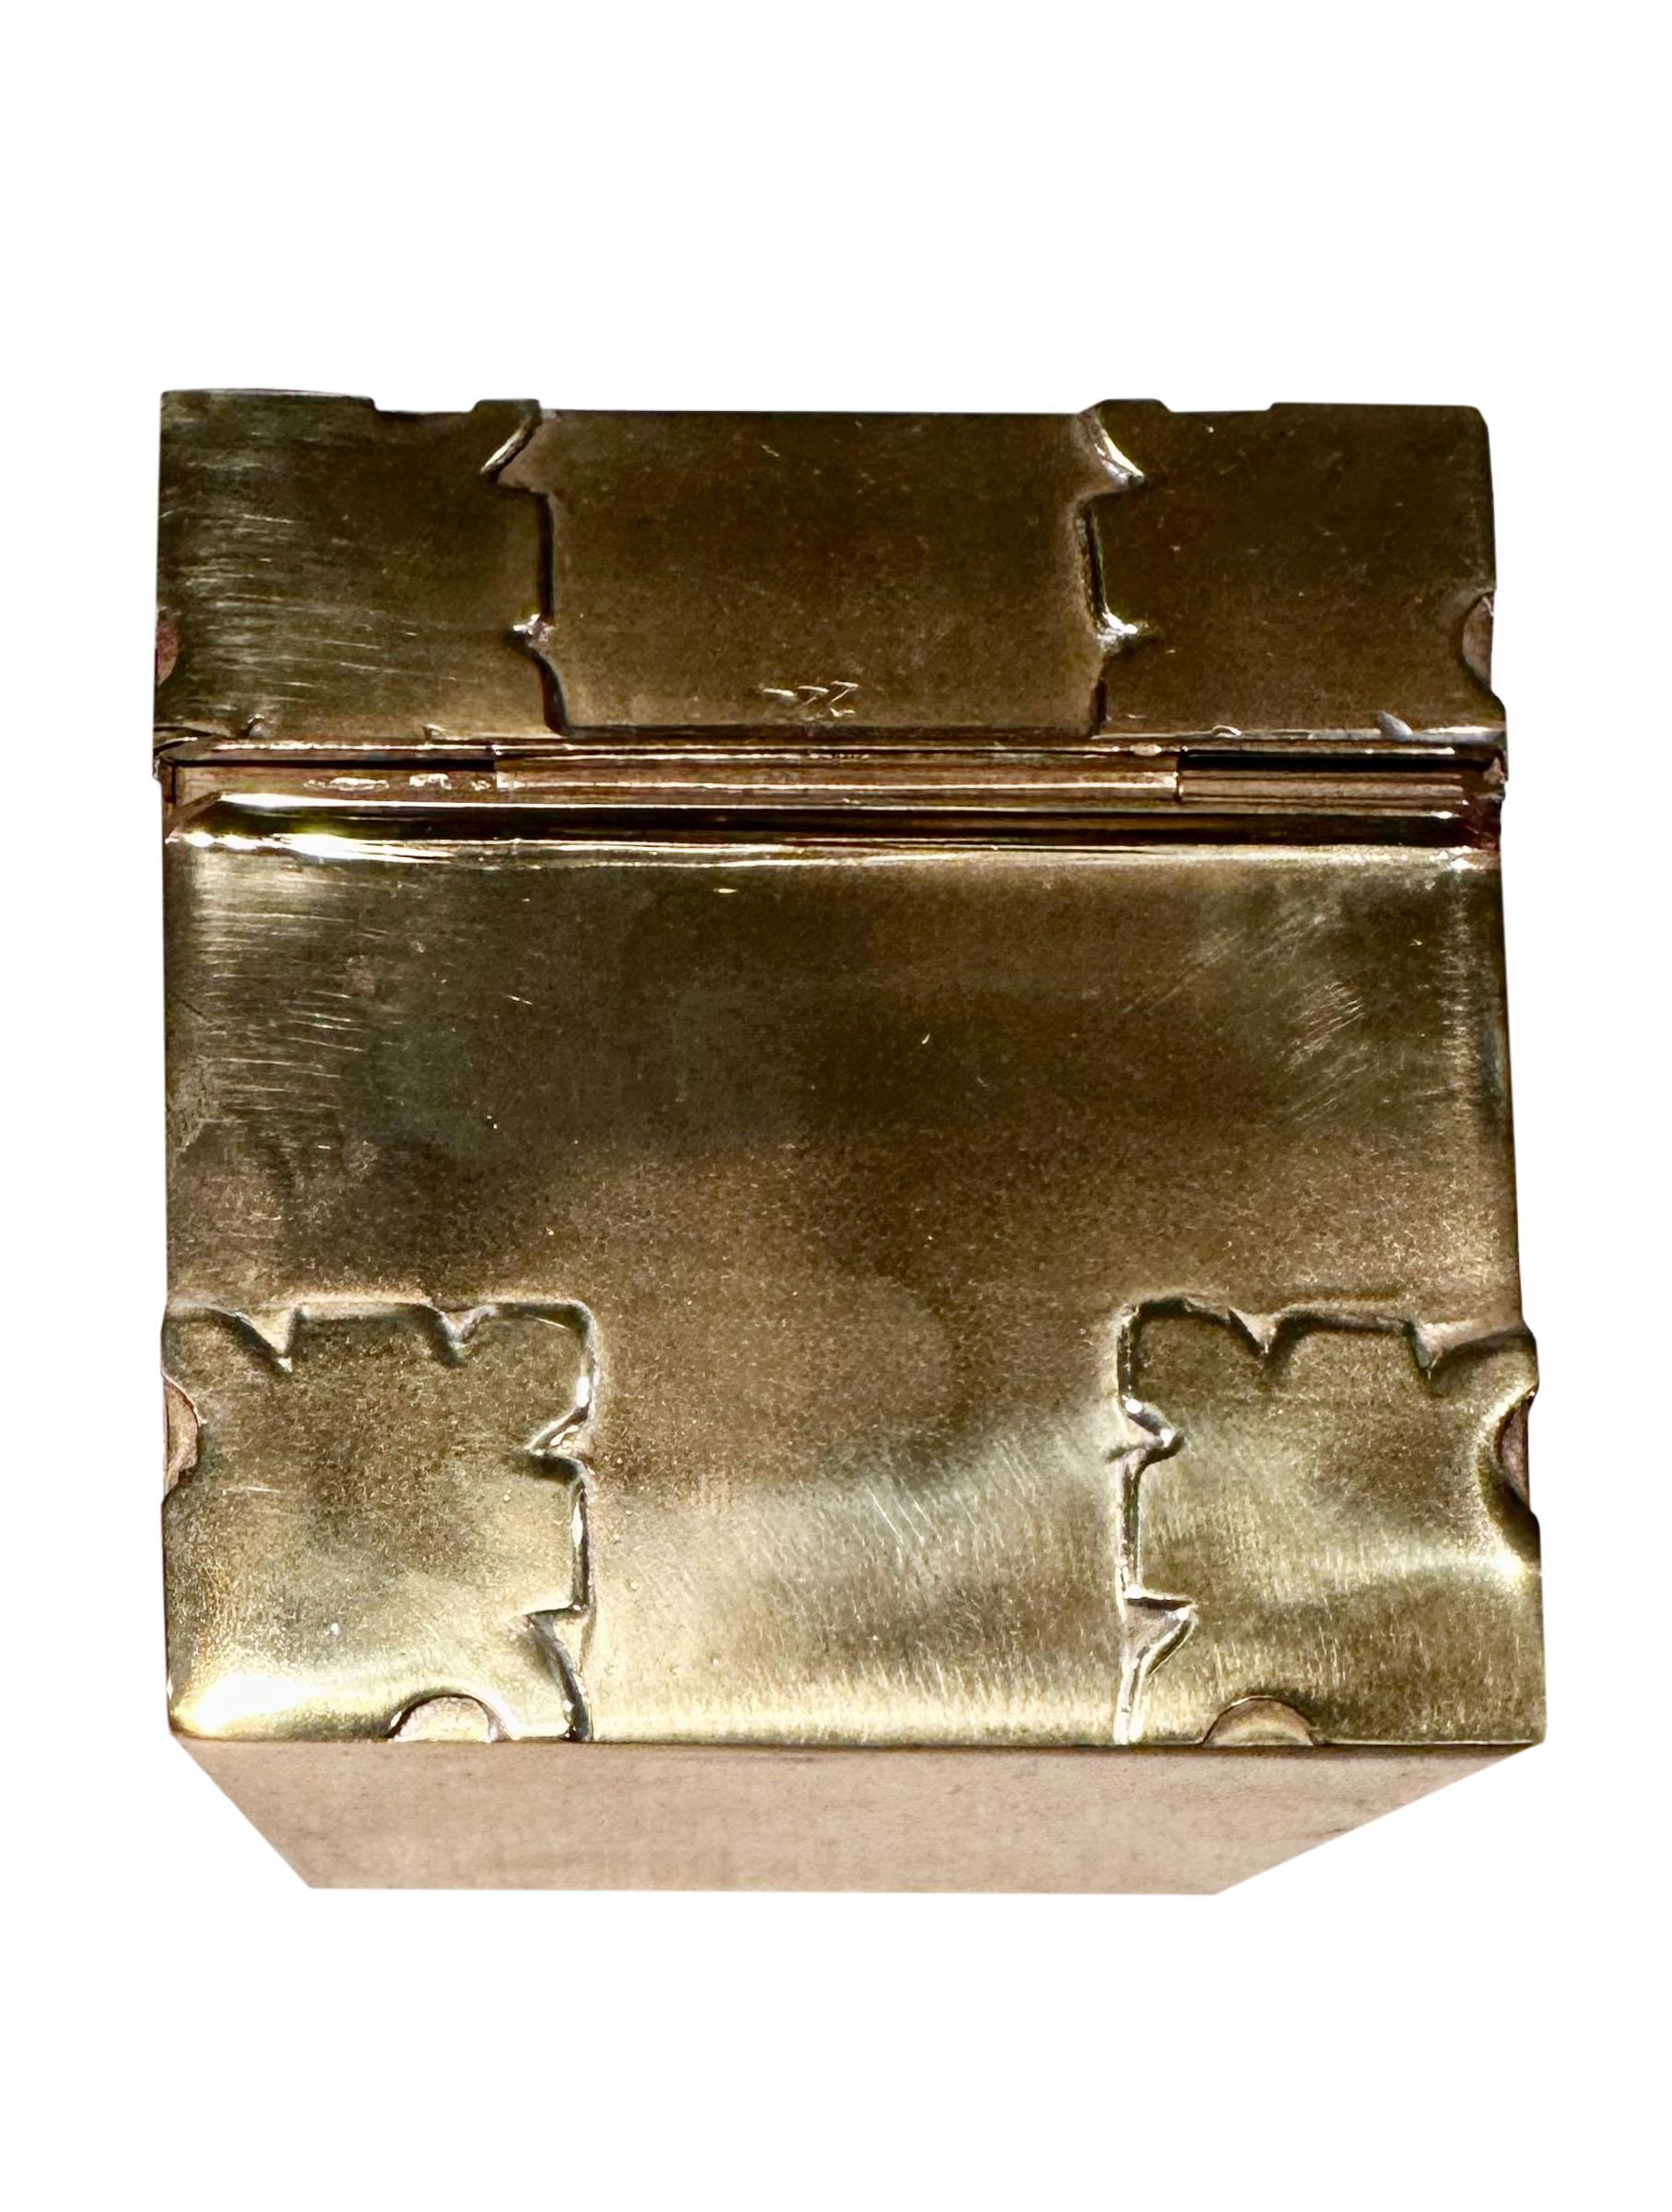 Midcentury Brass Box In Good Condition For Sale In Tampa, FL